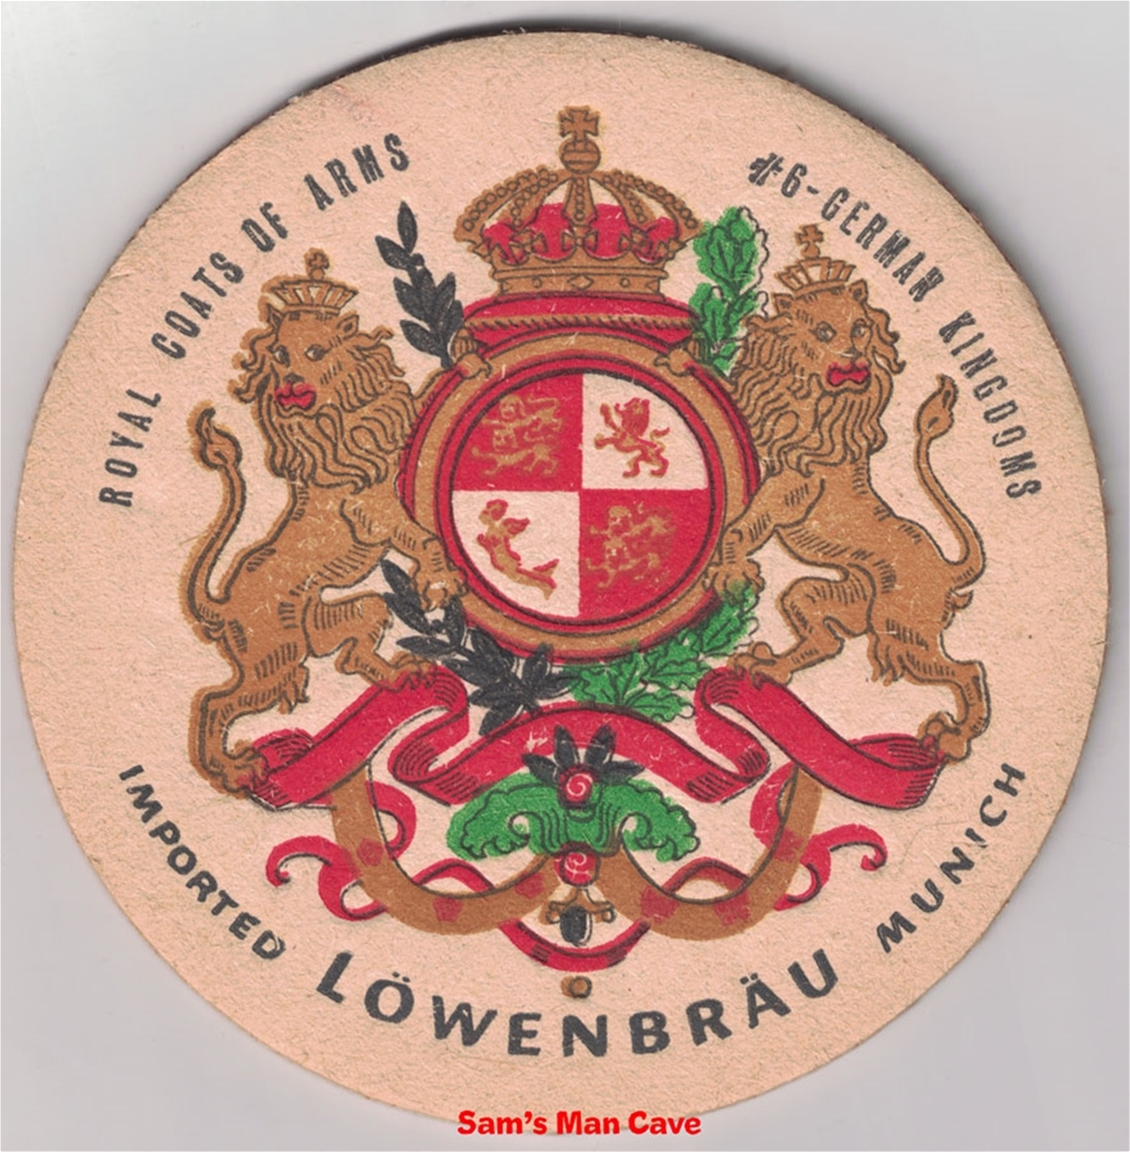 TWO  SIDED SHAPED BEER MAT COASTER LOWENBRAU MUNCHEN  PILS 6% 